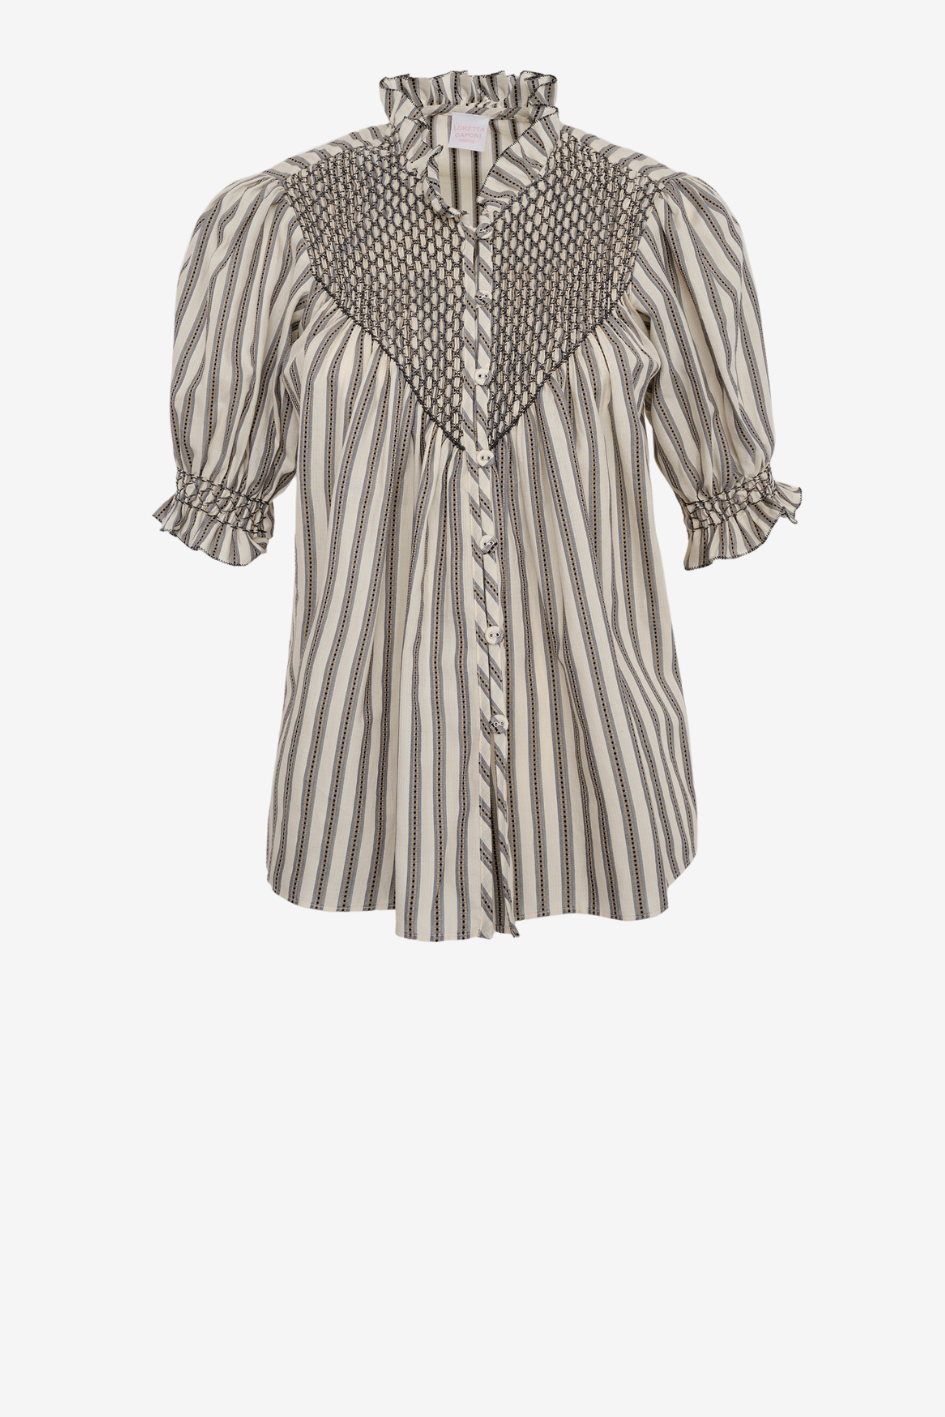 Stripped Blouse with puffed Sleeves